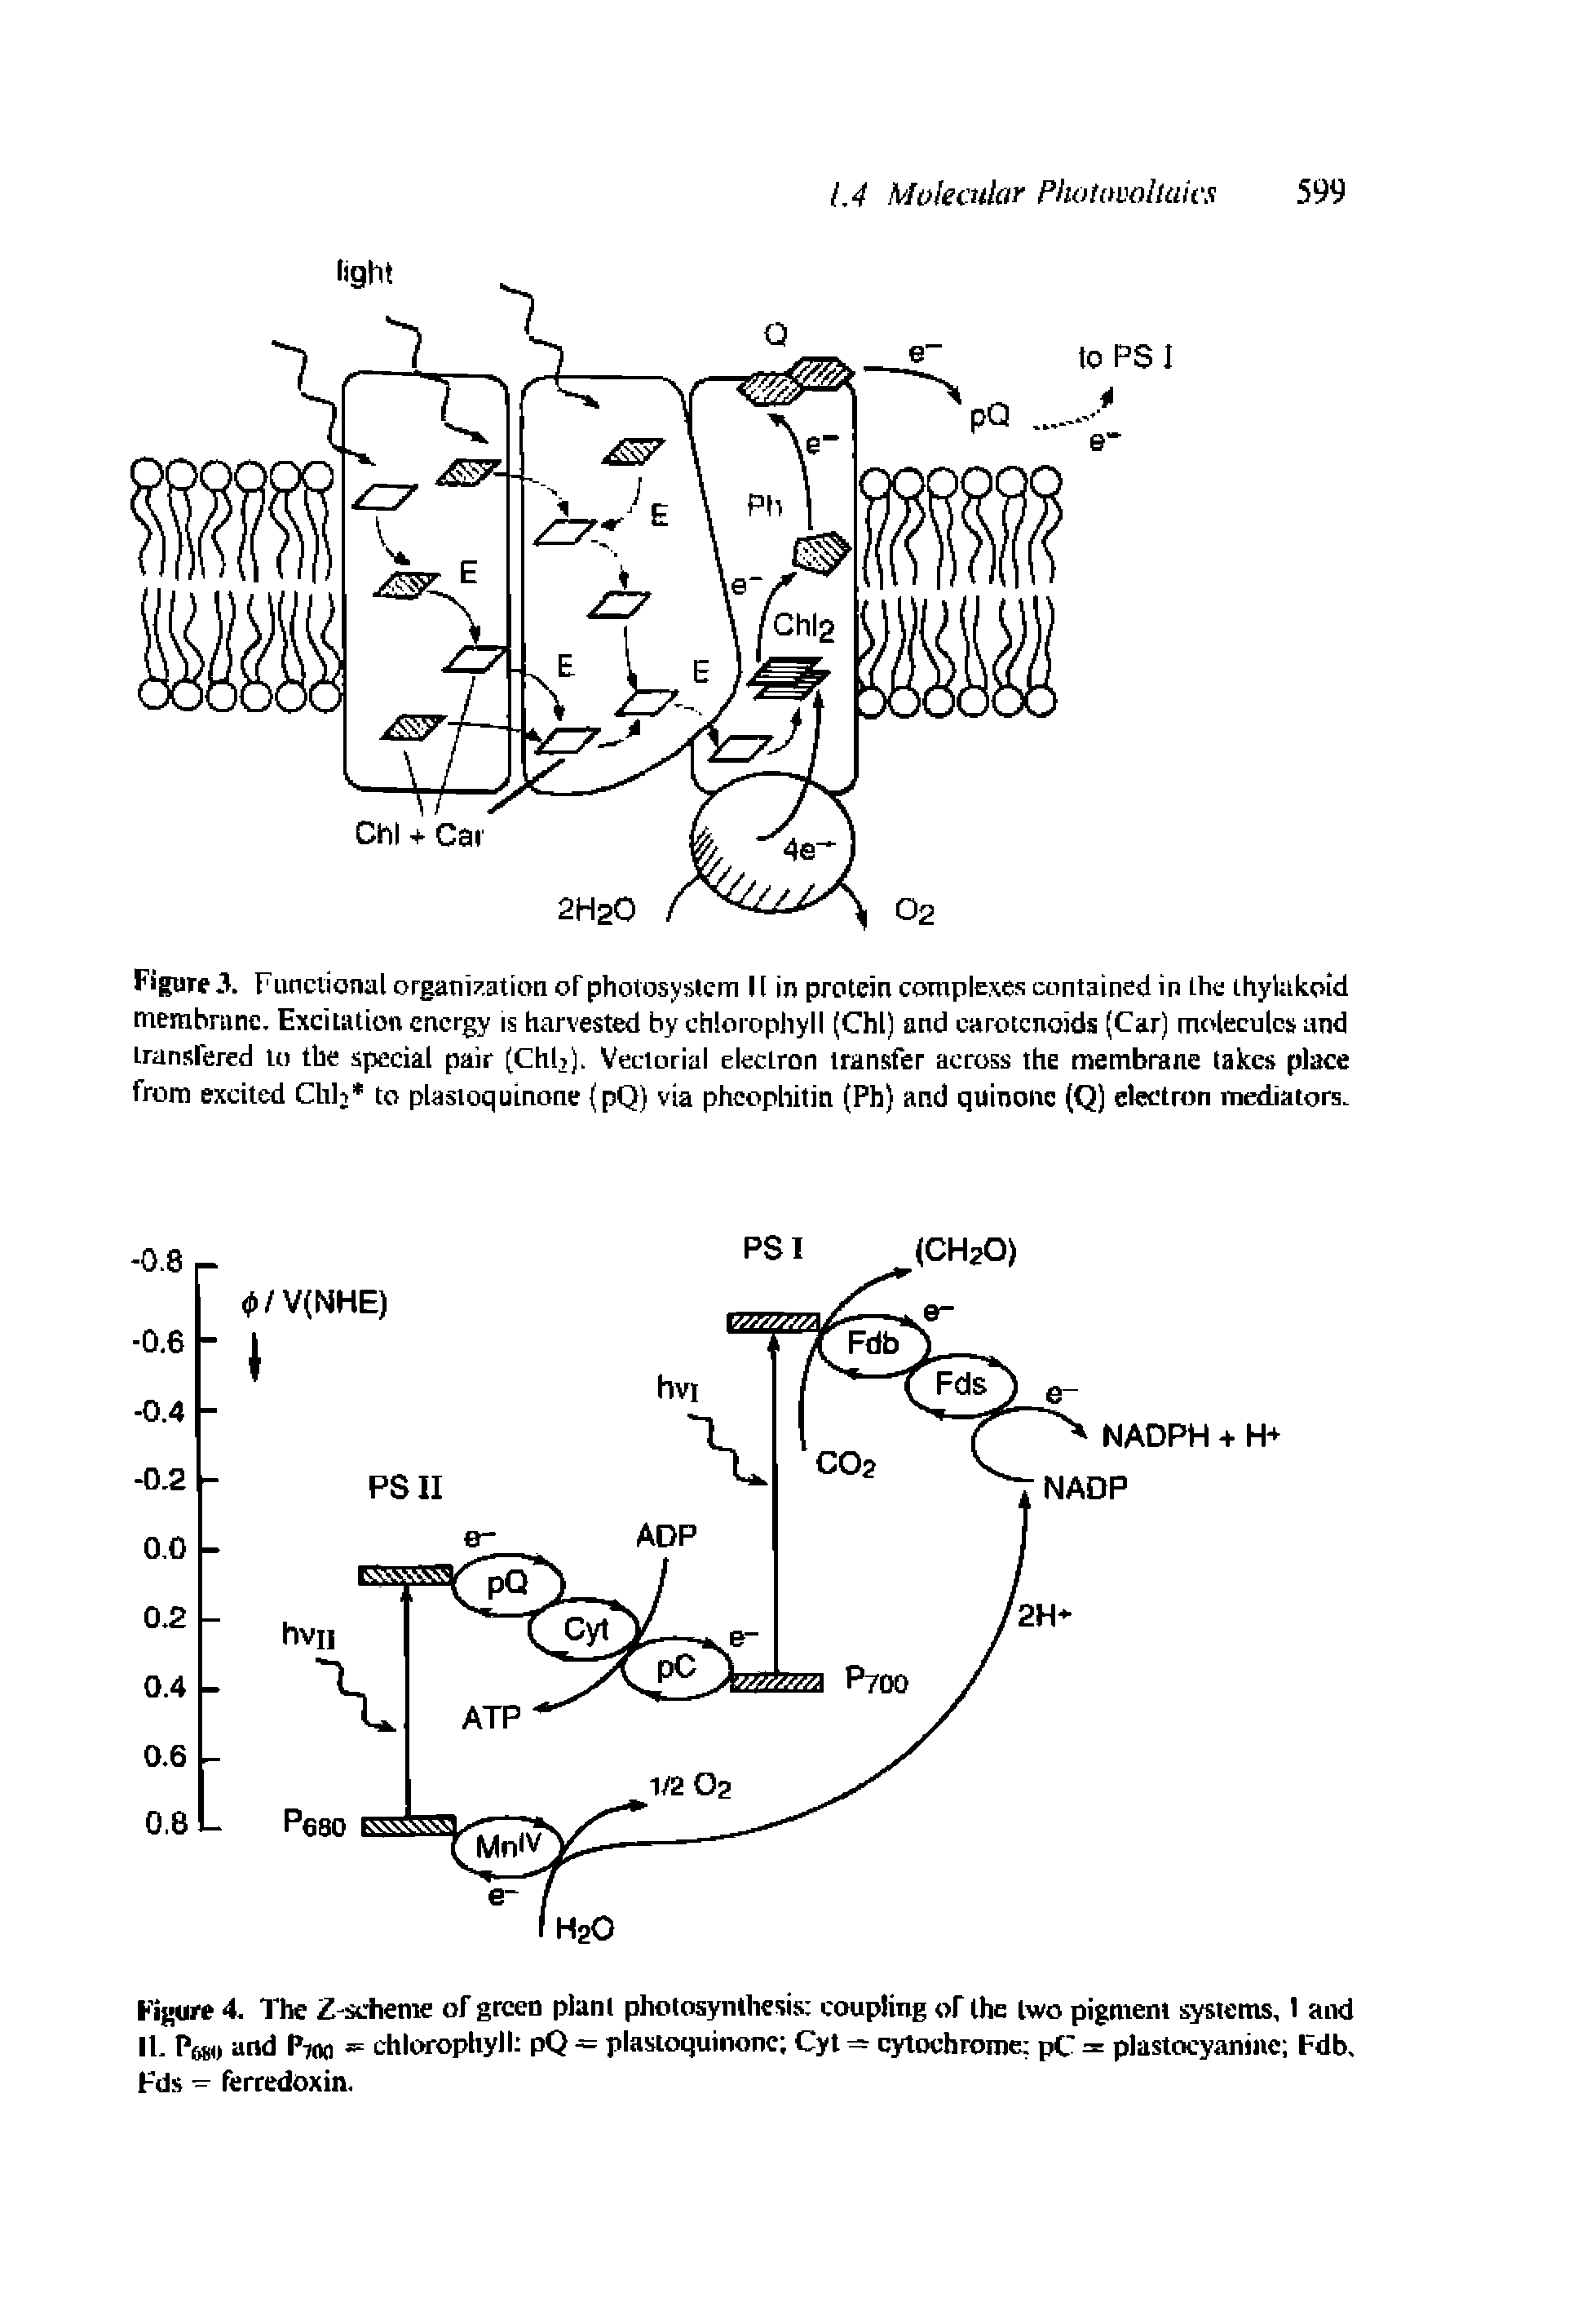 Figure 3. Fiincvional organisation oFpholosyslem I (in protein complexes contained in the thylakoid membrane. Excitation energy is harvested by chlorophyll (Chi) and carotenoids (Car) molecules and transfered to the special pair (Chlj). Vectorial electron transfer across the membrane takes place front excited Chi to plastoqutnone (pQ) via phcopliitin (Ph) and quinone (Q) electron mediators.